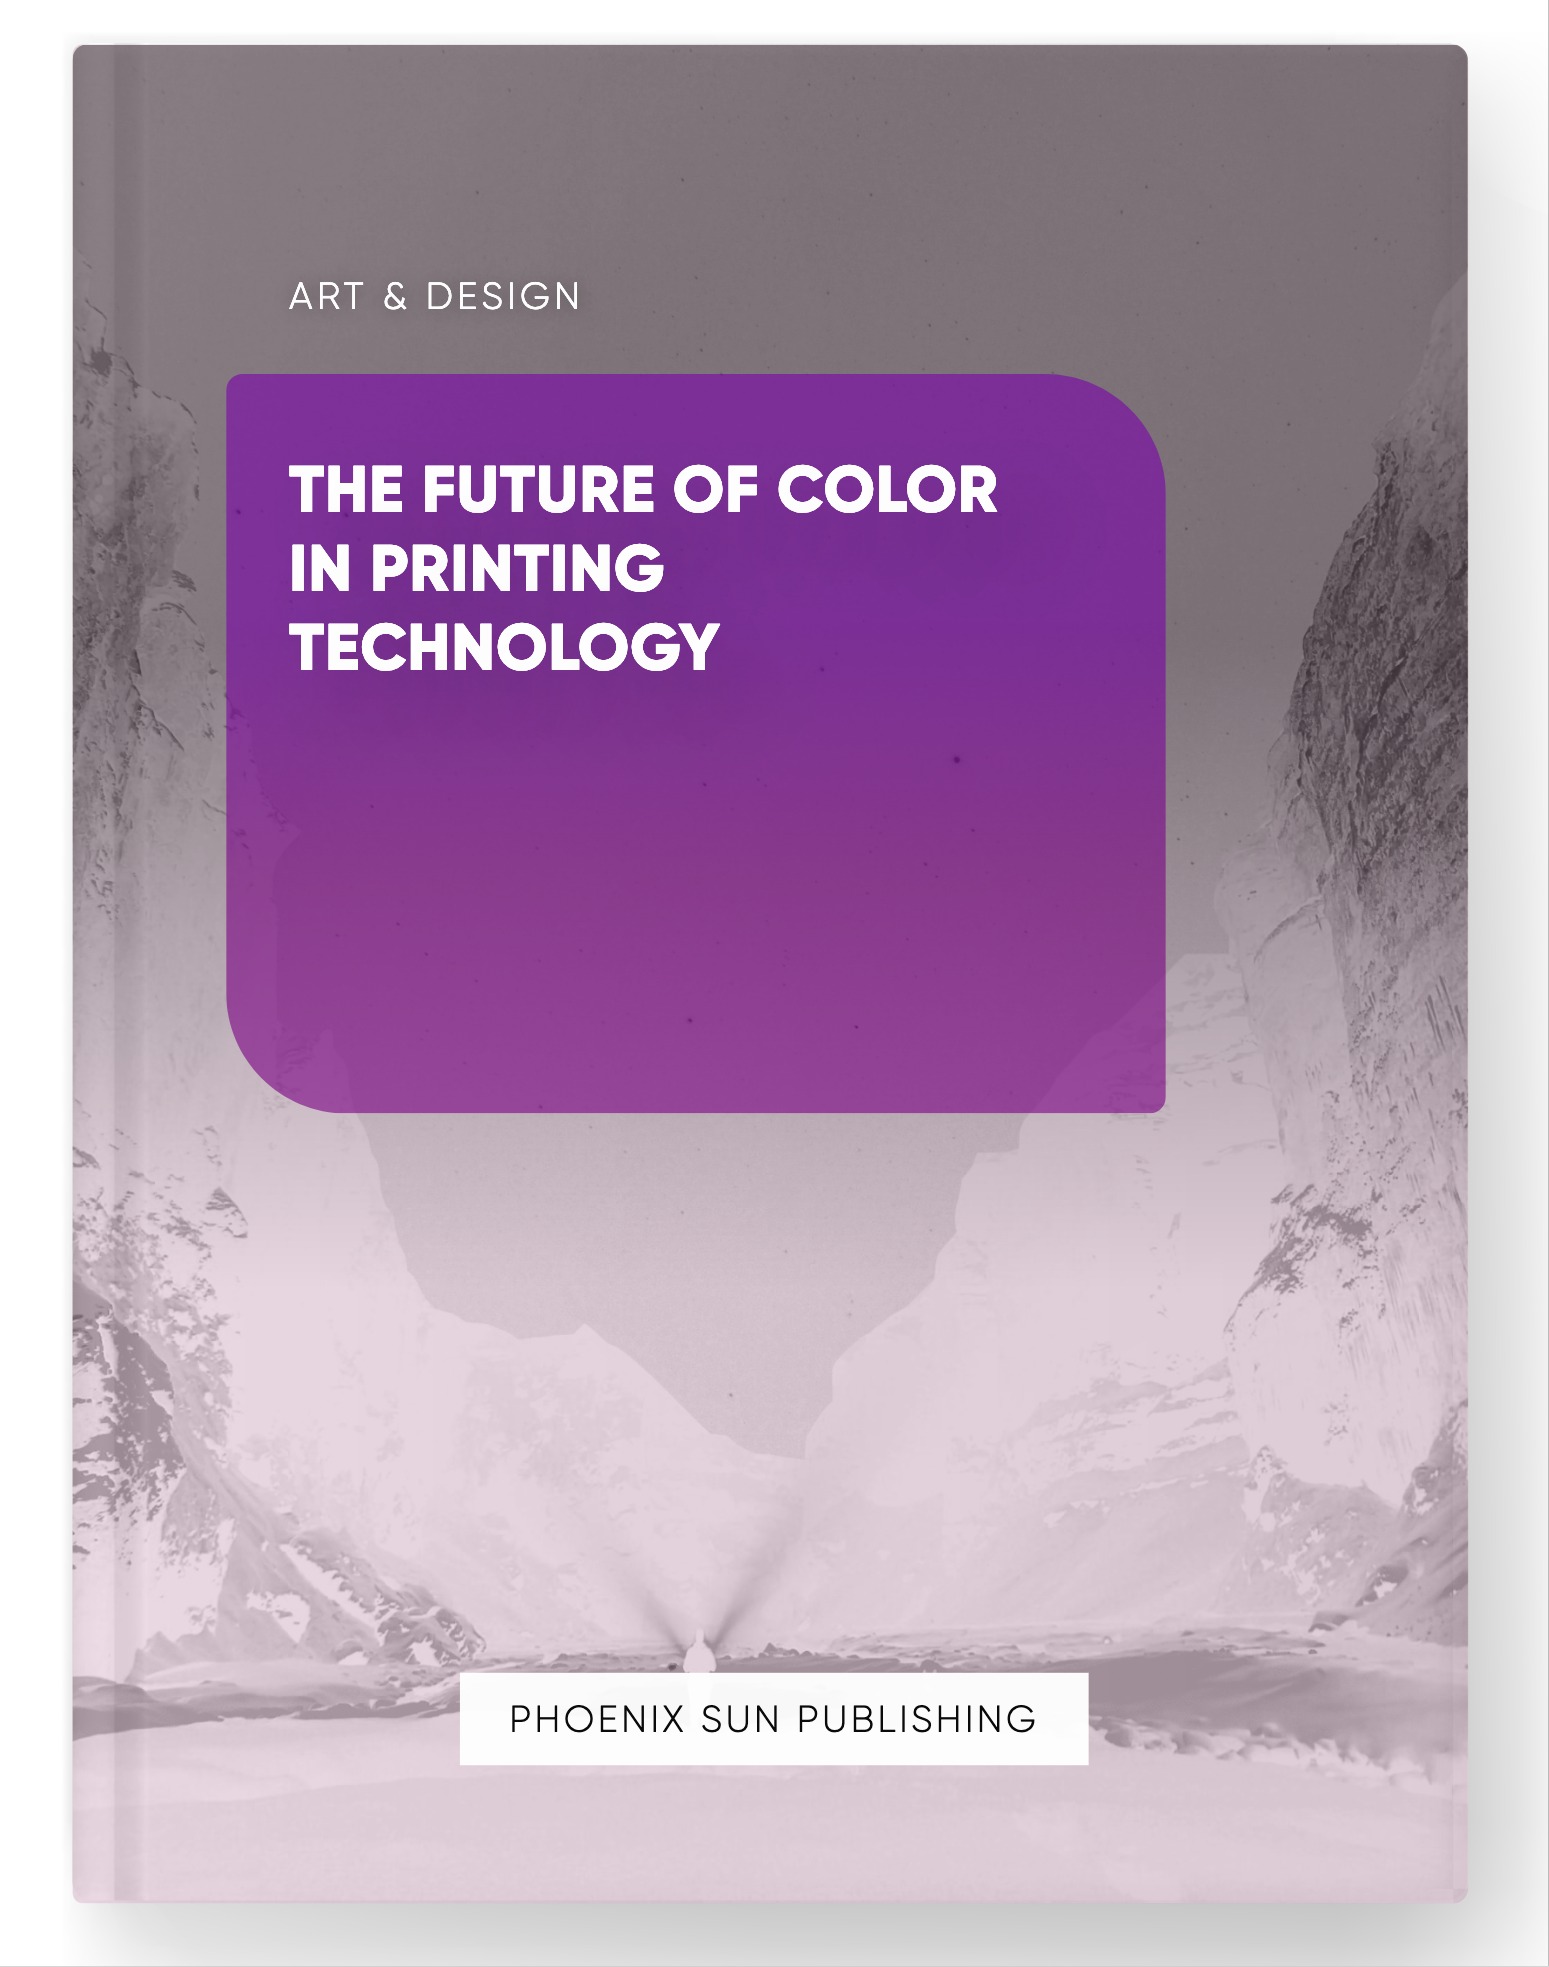 The Future of Color in Printing Technology